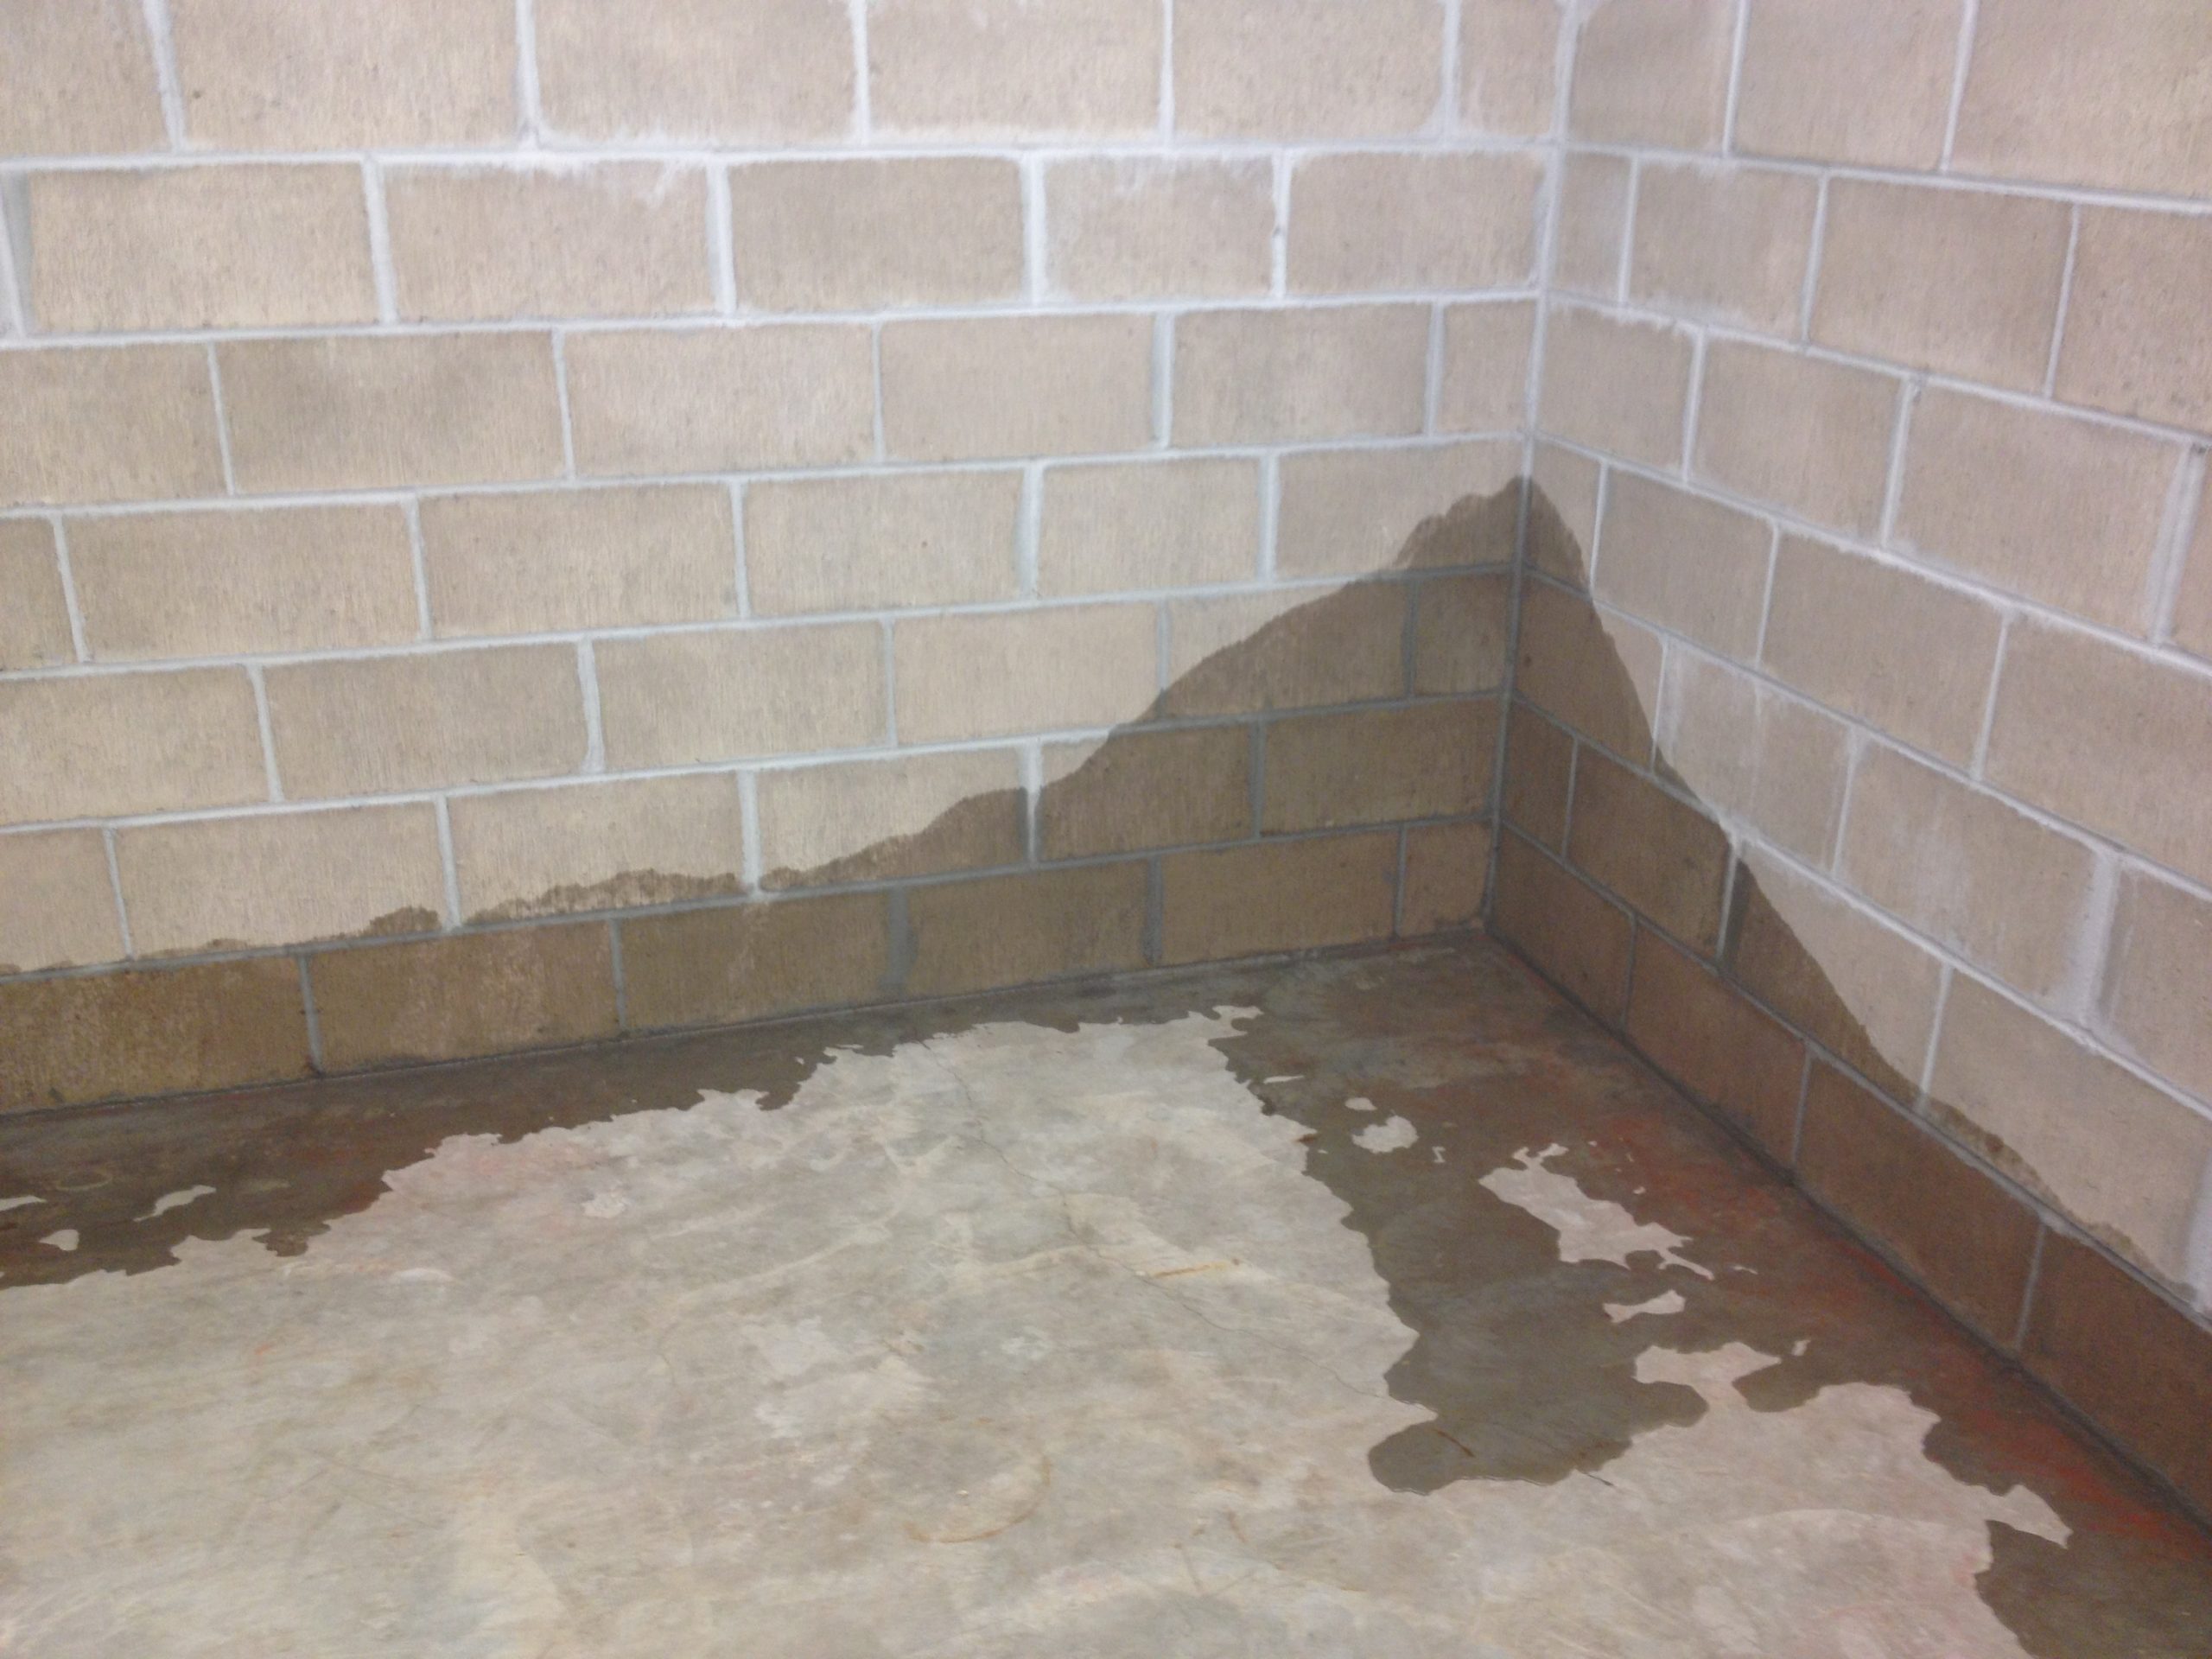 level pro Foundation repair,Waterproofing,Foundation repair ,concrete lifting, resurfacing, and replacement Cleveland Ohio